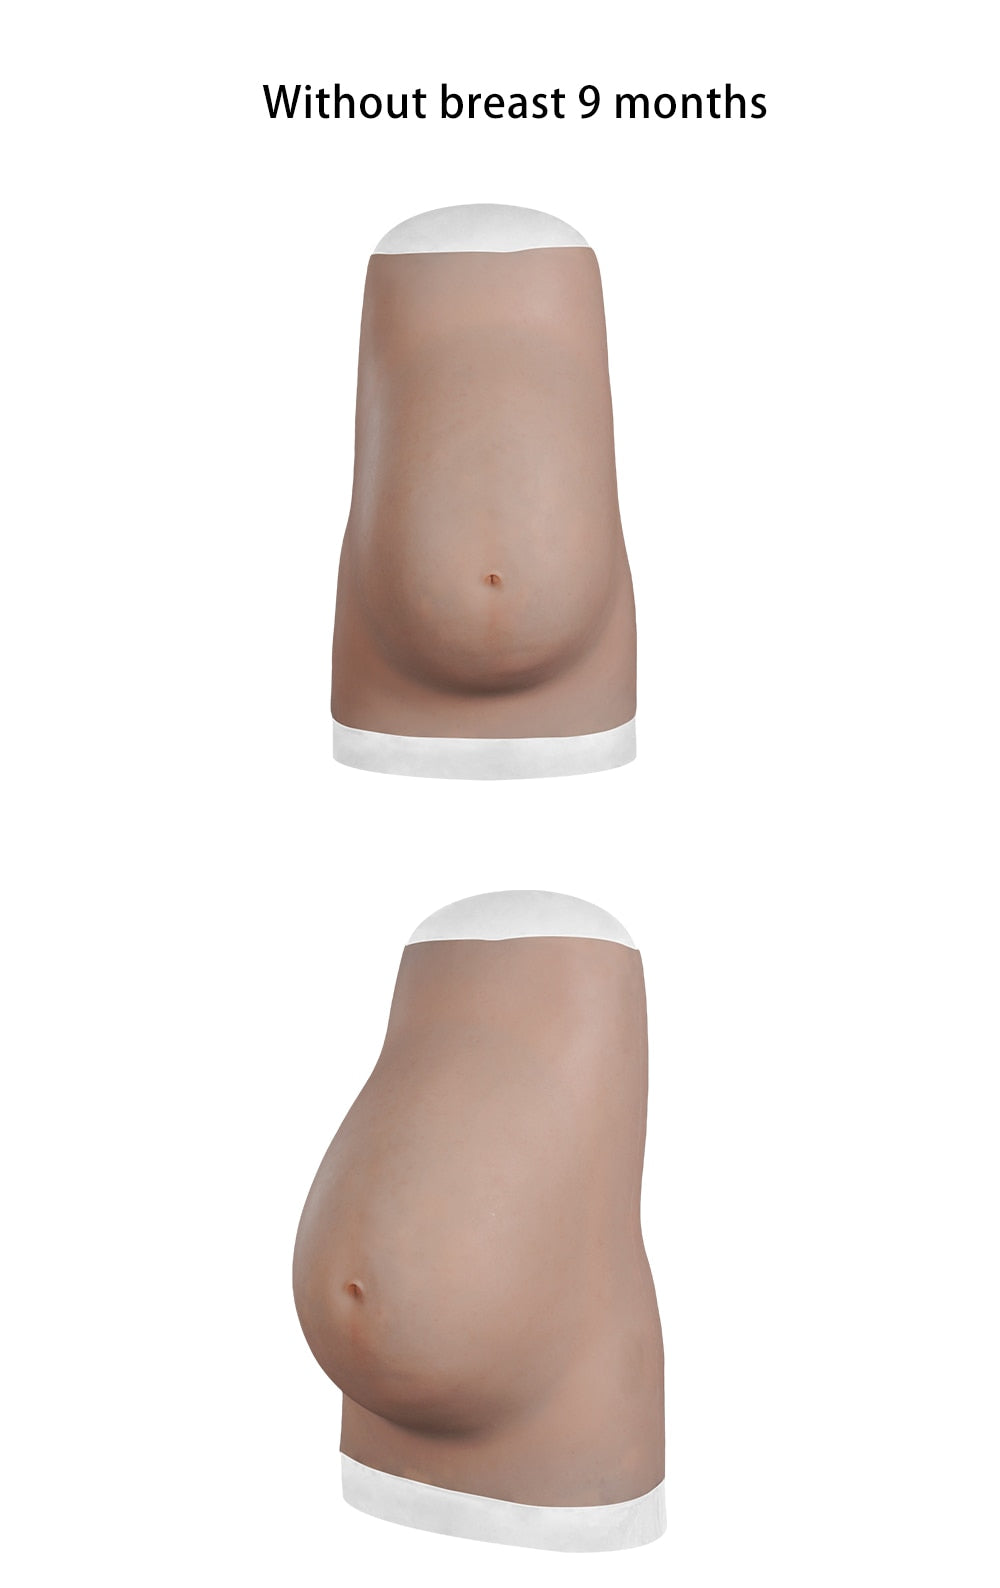 Realistic Silicone Fake Pregnant Belly with Stretch Marks - Crossdresser/Cosplay Accessory